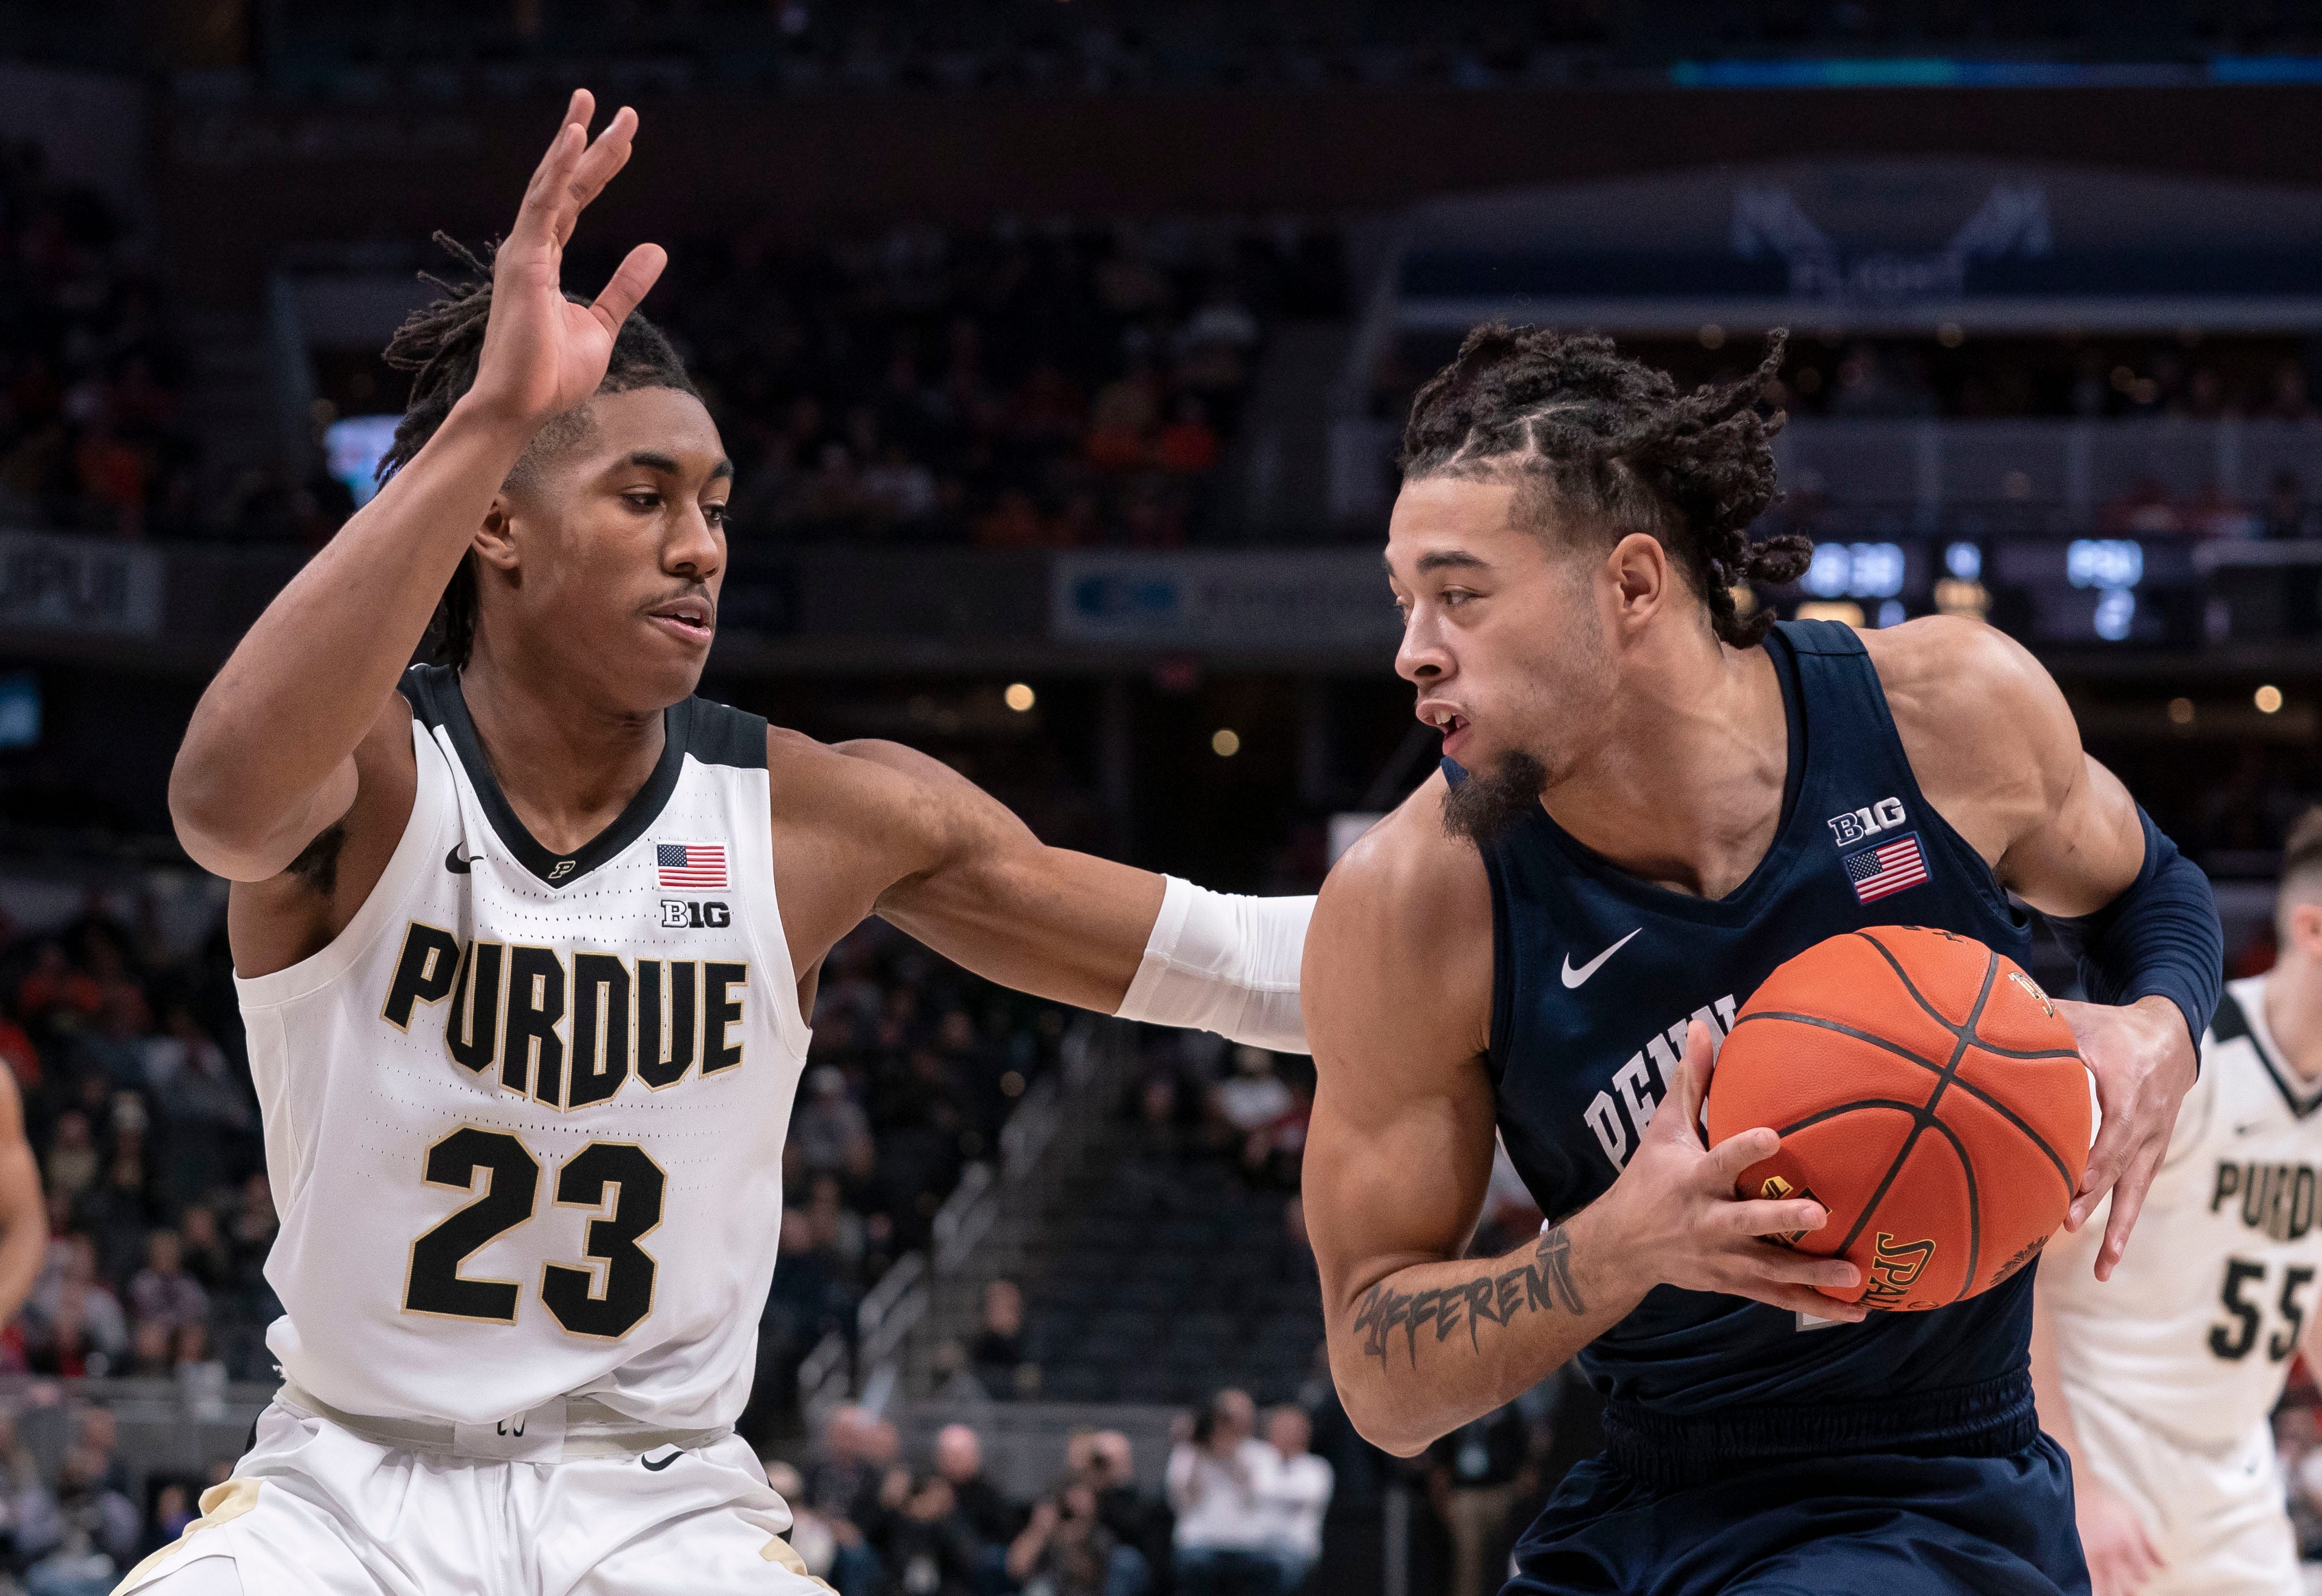 Purdue Boilermakers guard Jaden Ivey (23) guards Penn State Nittany Lions forward Seth Lundy (1) during the Big Ten tournament on Friday, March. 11, 2022, at Gainbridge Fieldhouse in Indianapolis. Purdue Boilermakers defeated the Penn State Nittany Lions, 69-61.&nbsp;